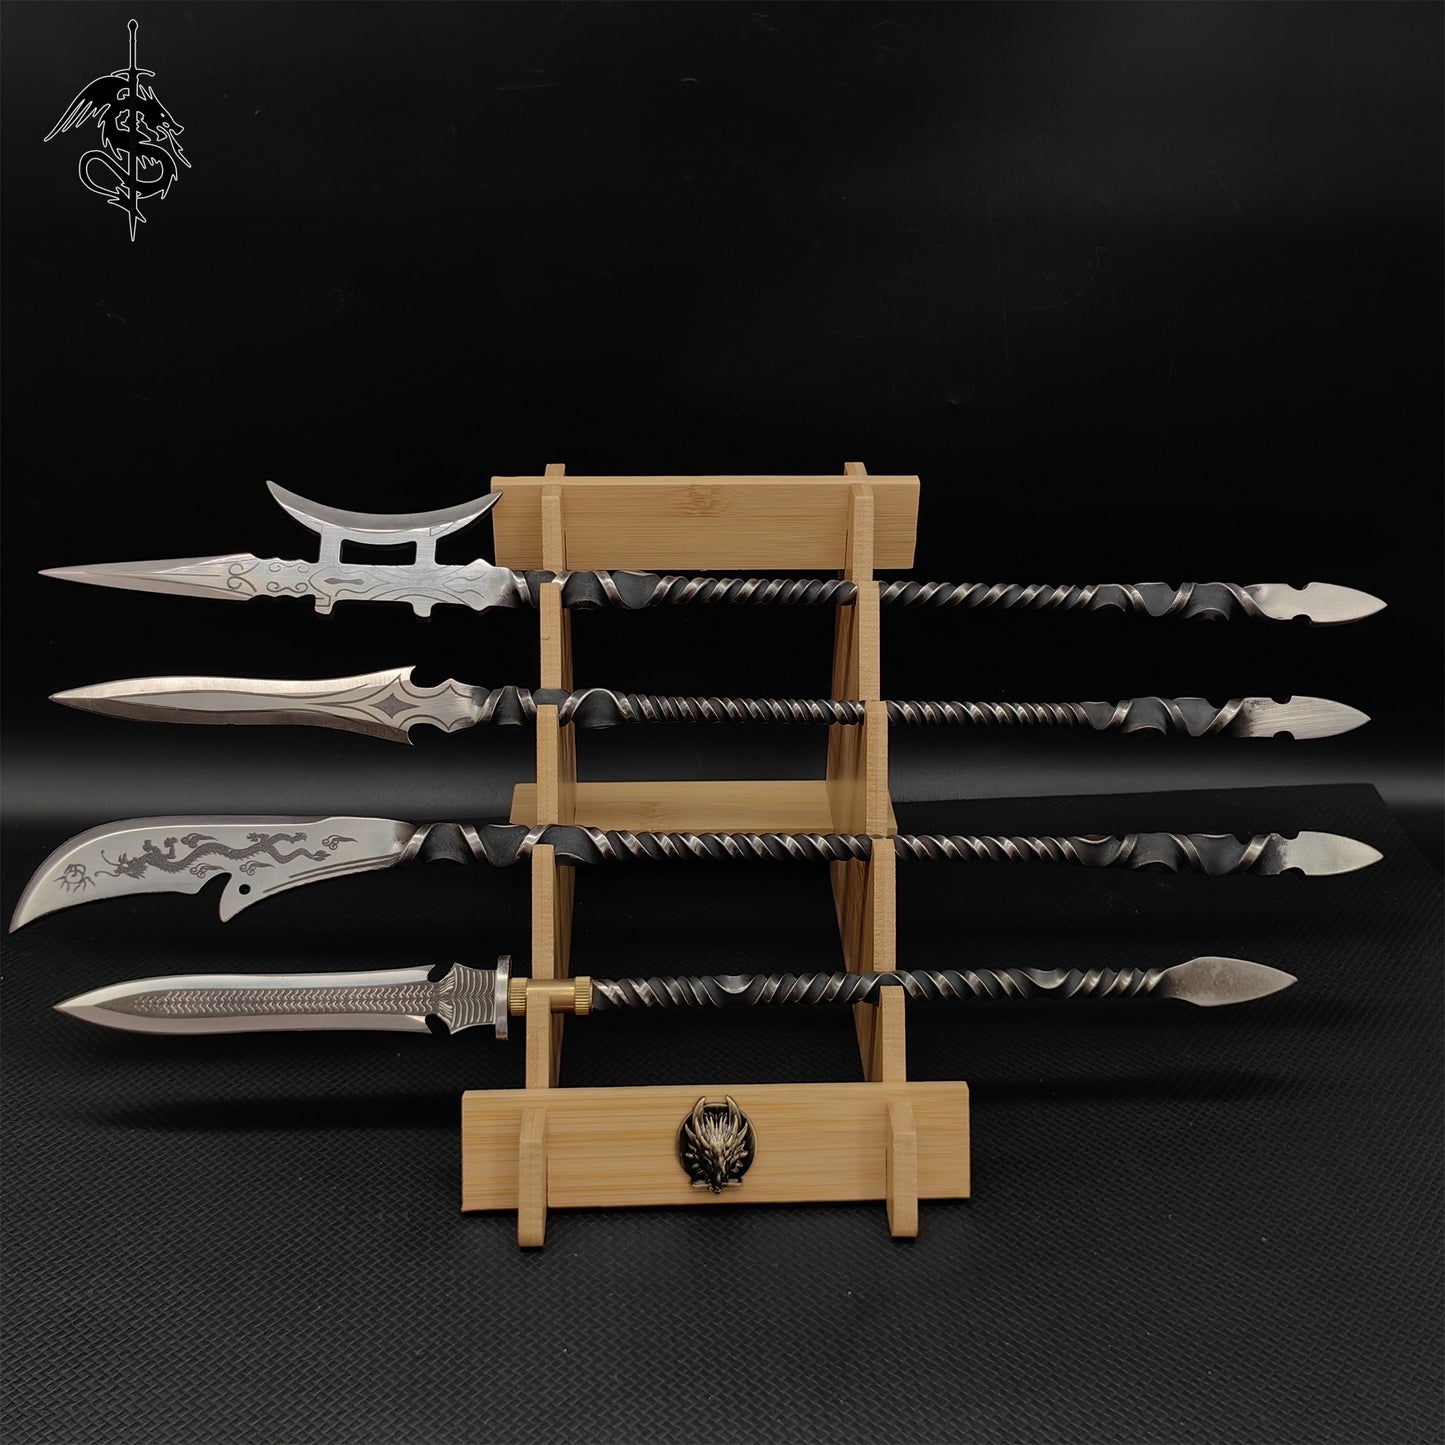 Hand-Forged Steel Tea Knife Long-Handle Spear 4 In 1 Pack